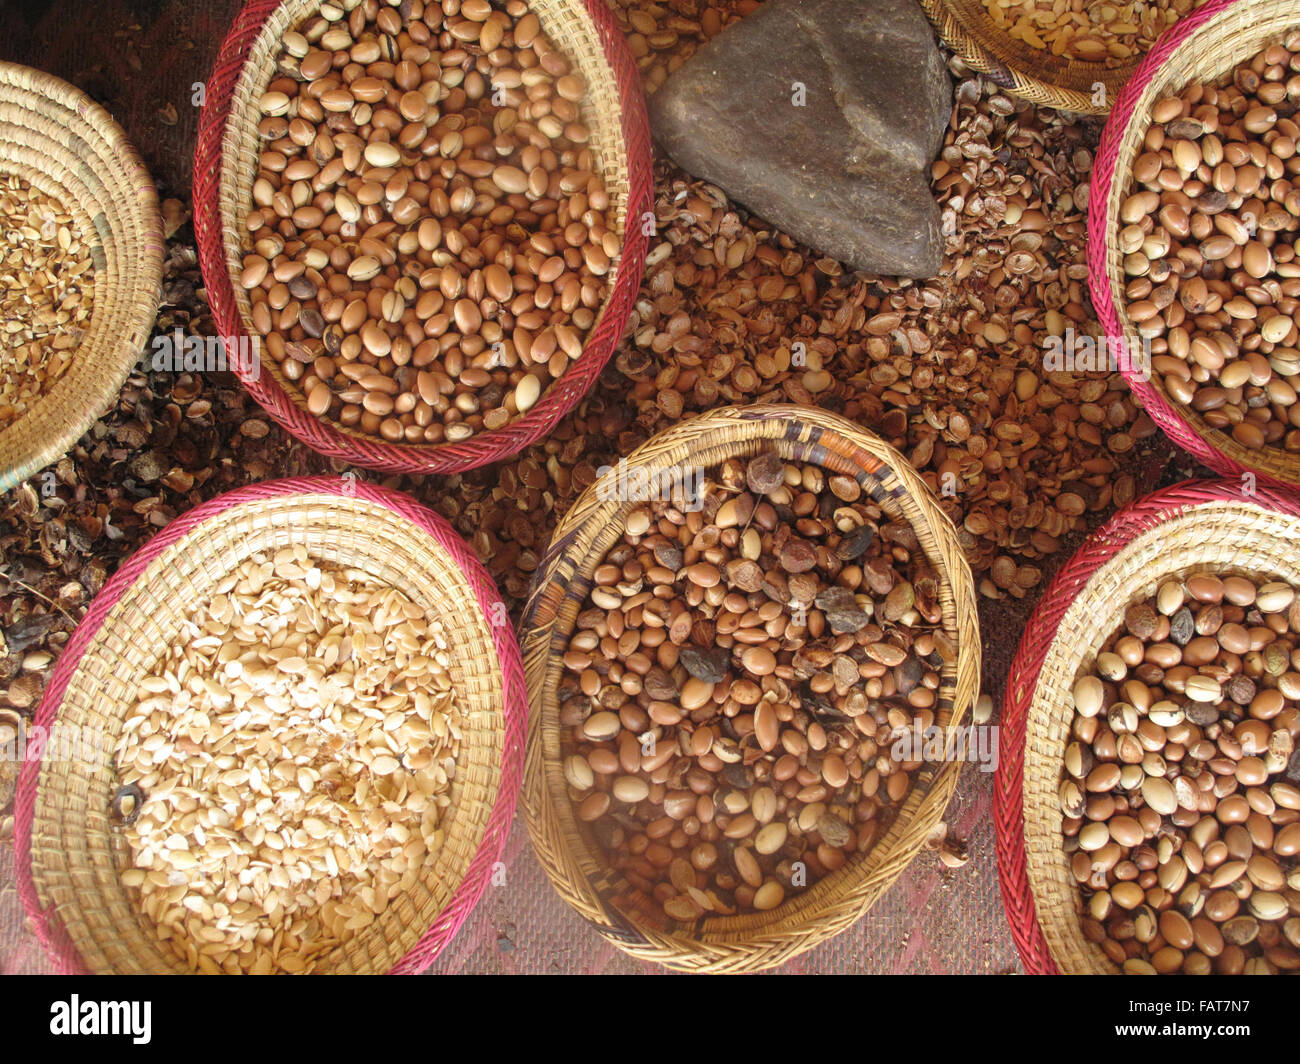 baskets of beans and pulses in morocco Stock Photo